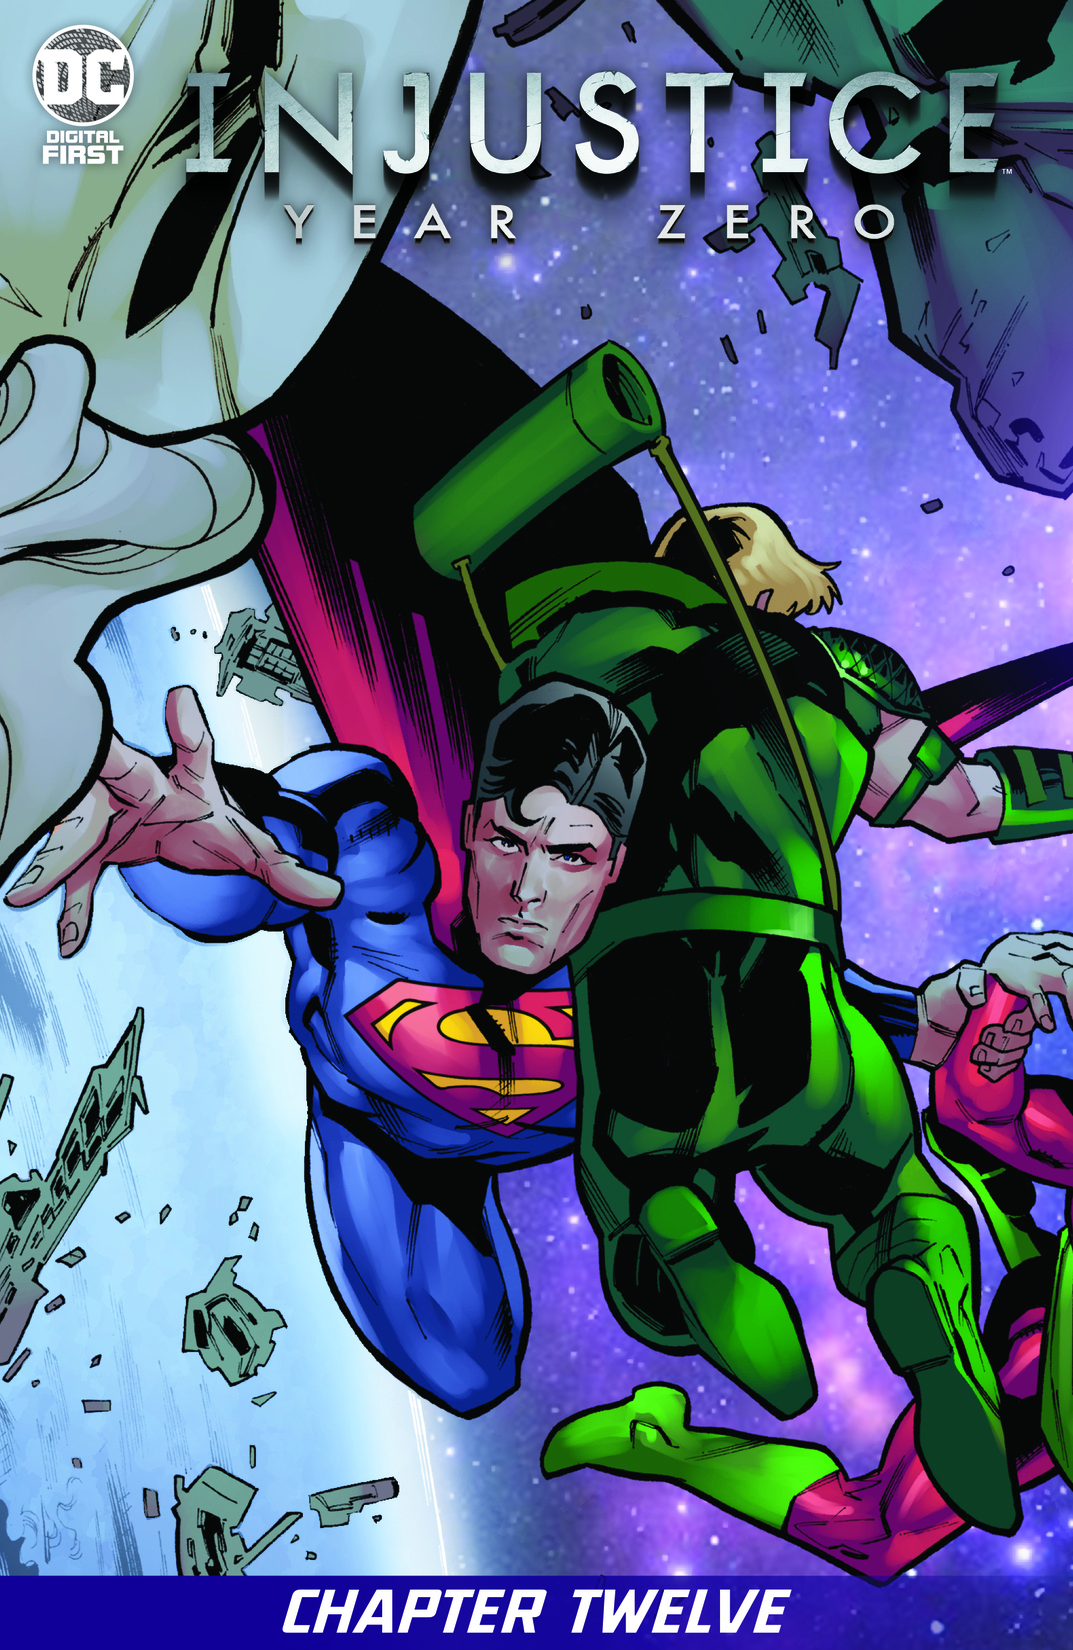 Injustice: Year Zero #12 preview images